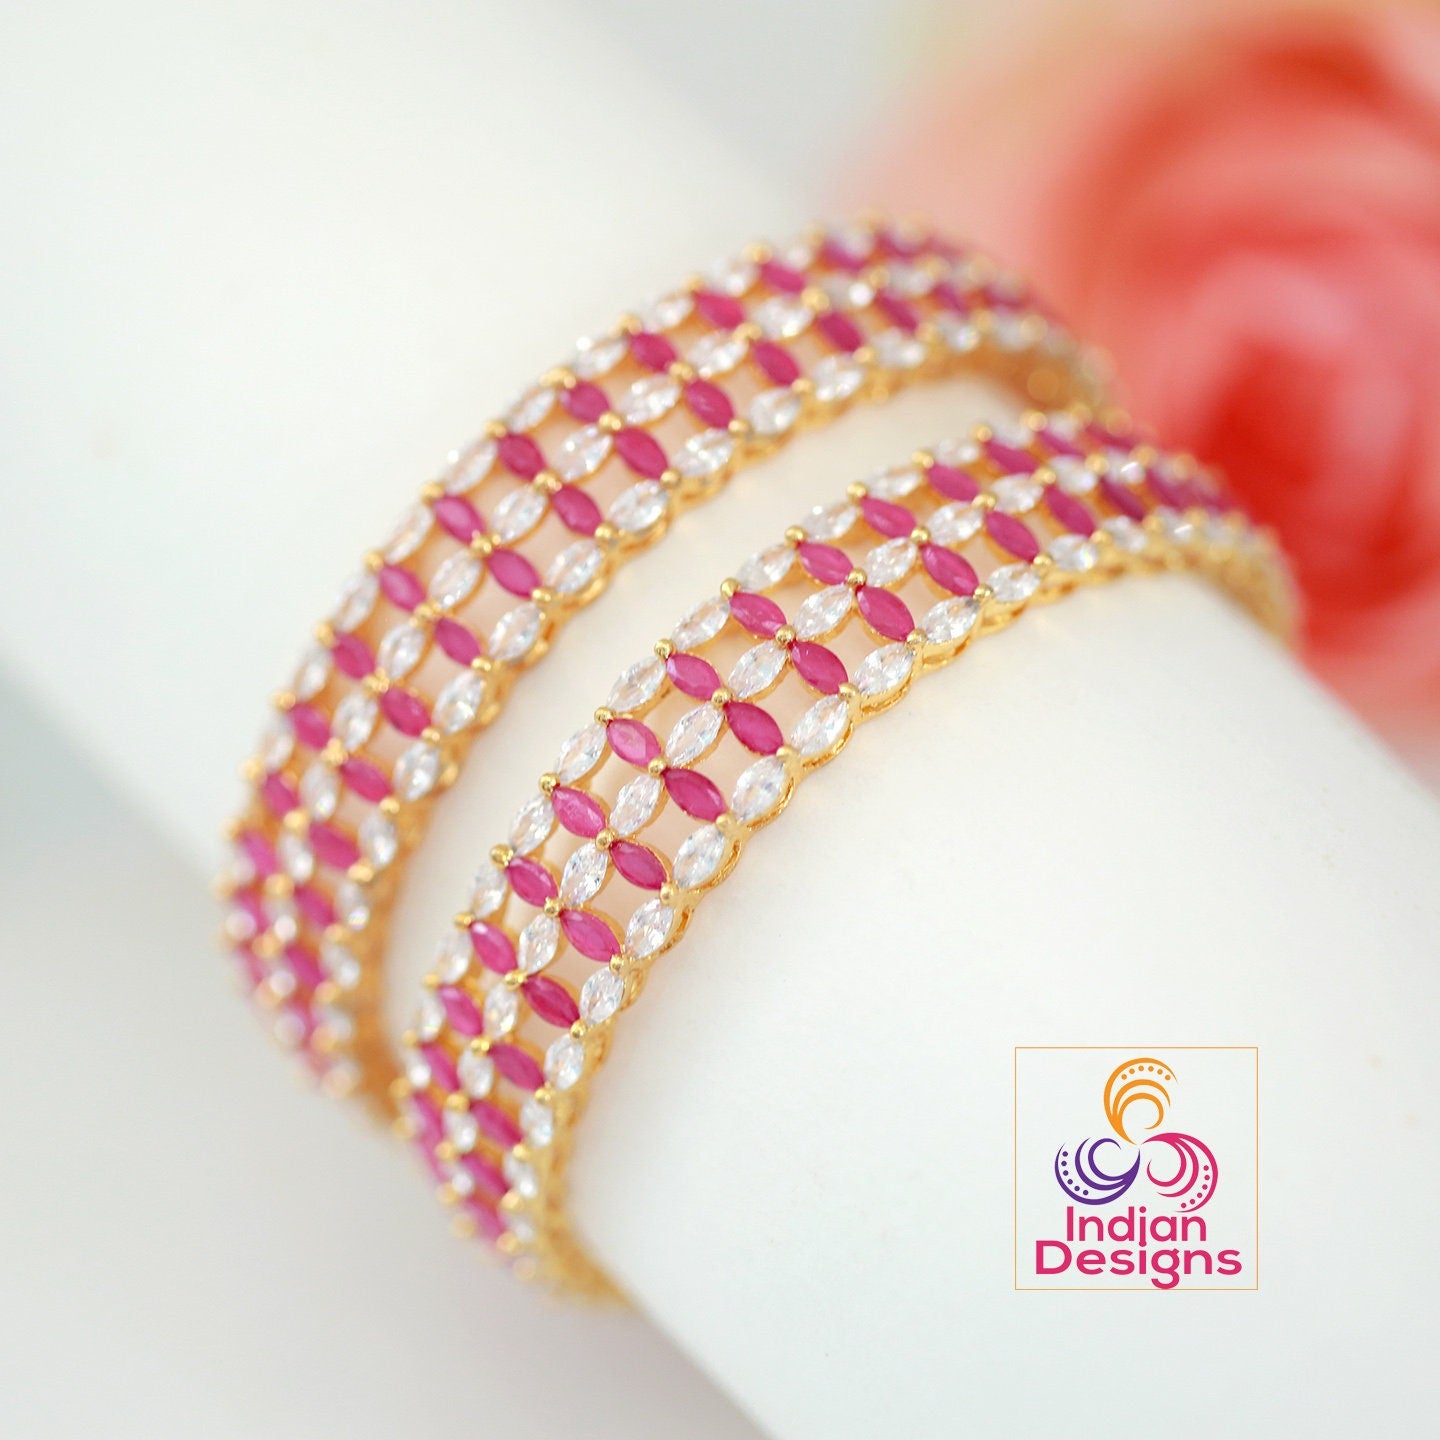 22k Gold plated American diamond marquise cut ruby stone bangles | CZ AD Bangle bracelet From Indian Designs | Party wear designer bangles